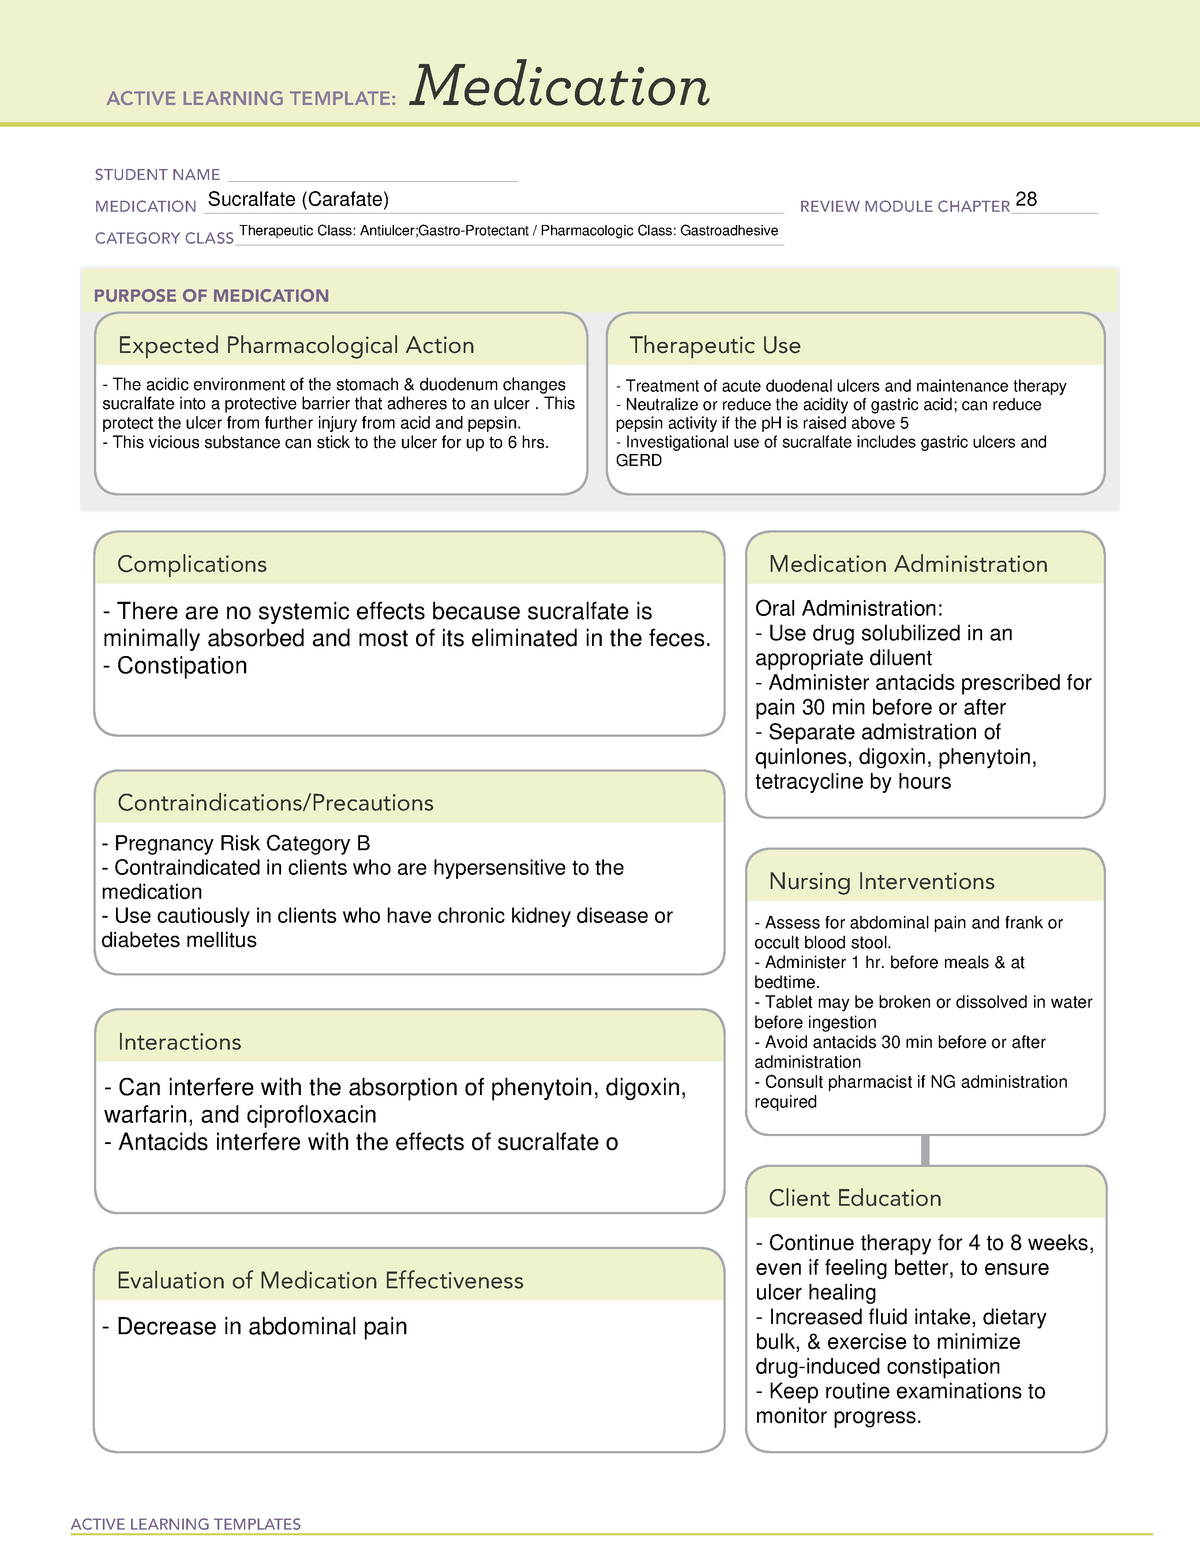 carafate-sucralfate-active-learning-templates-medication-student